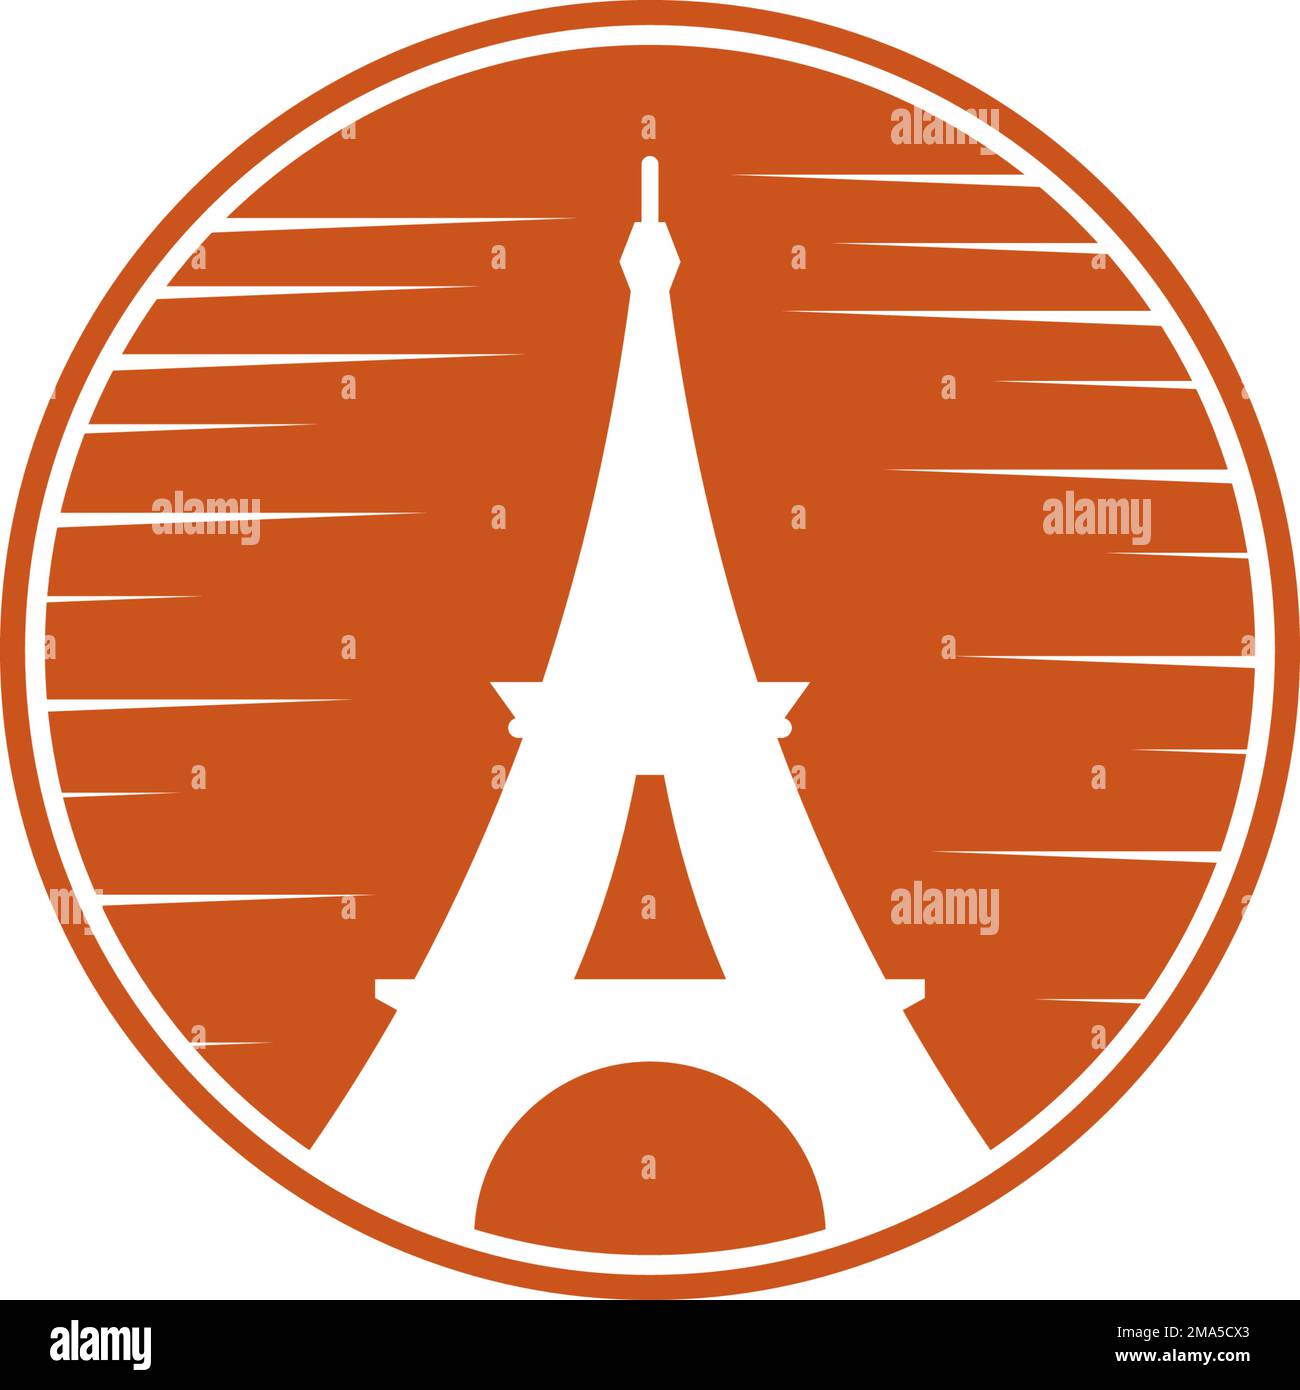 Eiffel tower in Paris. Isolated on white background,vector design. Stock Vector